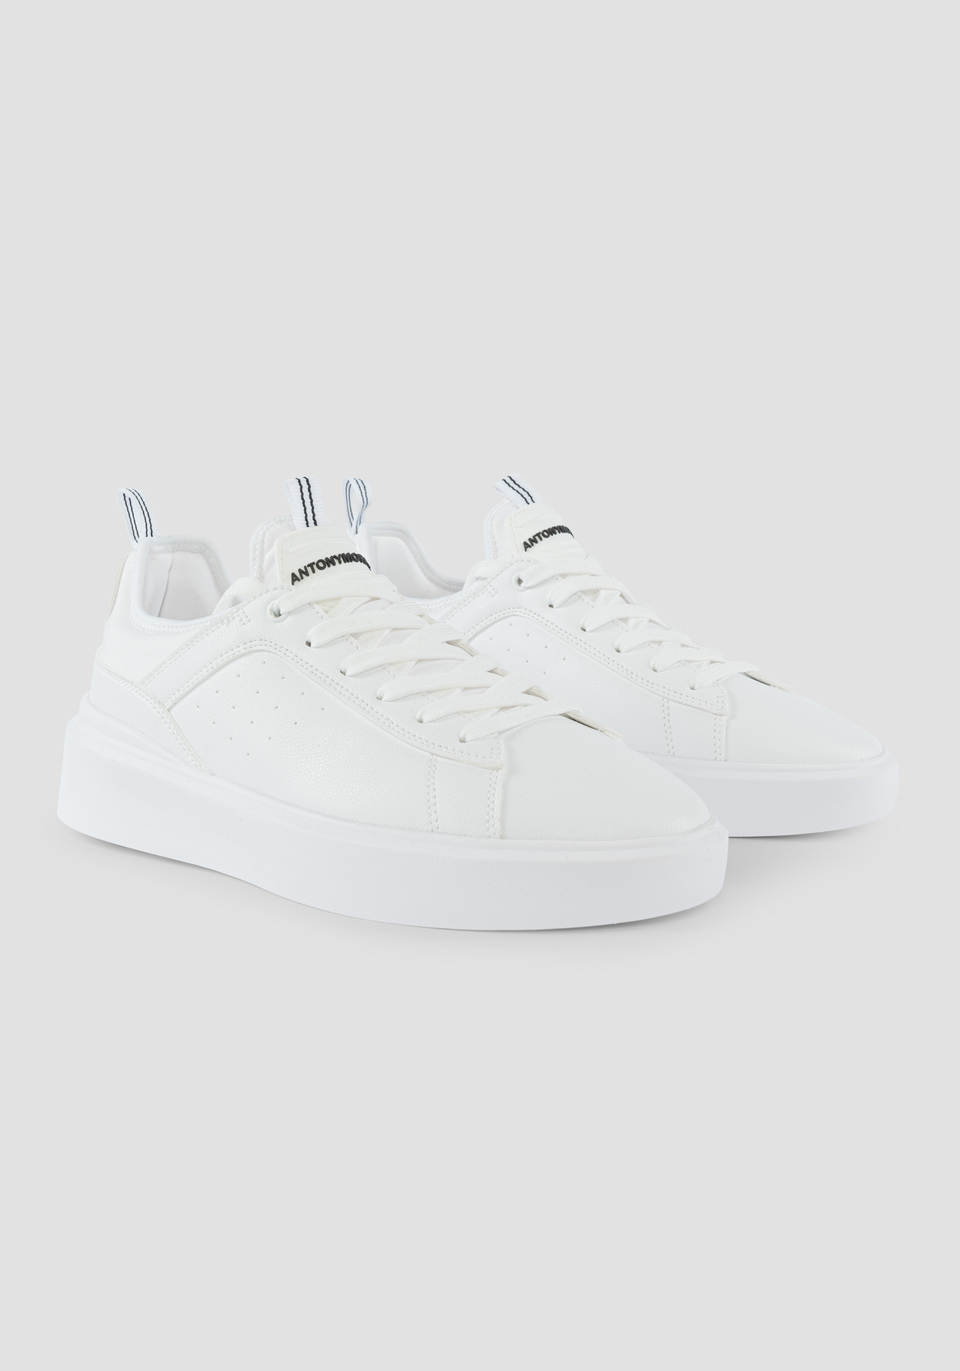 "BARNET" LOW-TOP SNEAKERS IN TUMBLED FAUX LEATHER WITH SOCKS IN TONE-ON-TONE STRETCH FABRIC - Antony Morato Online Shop